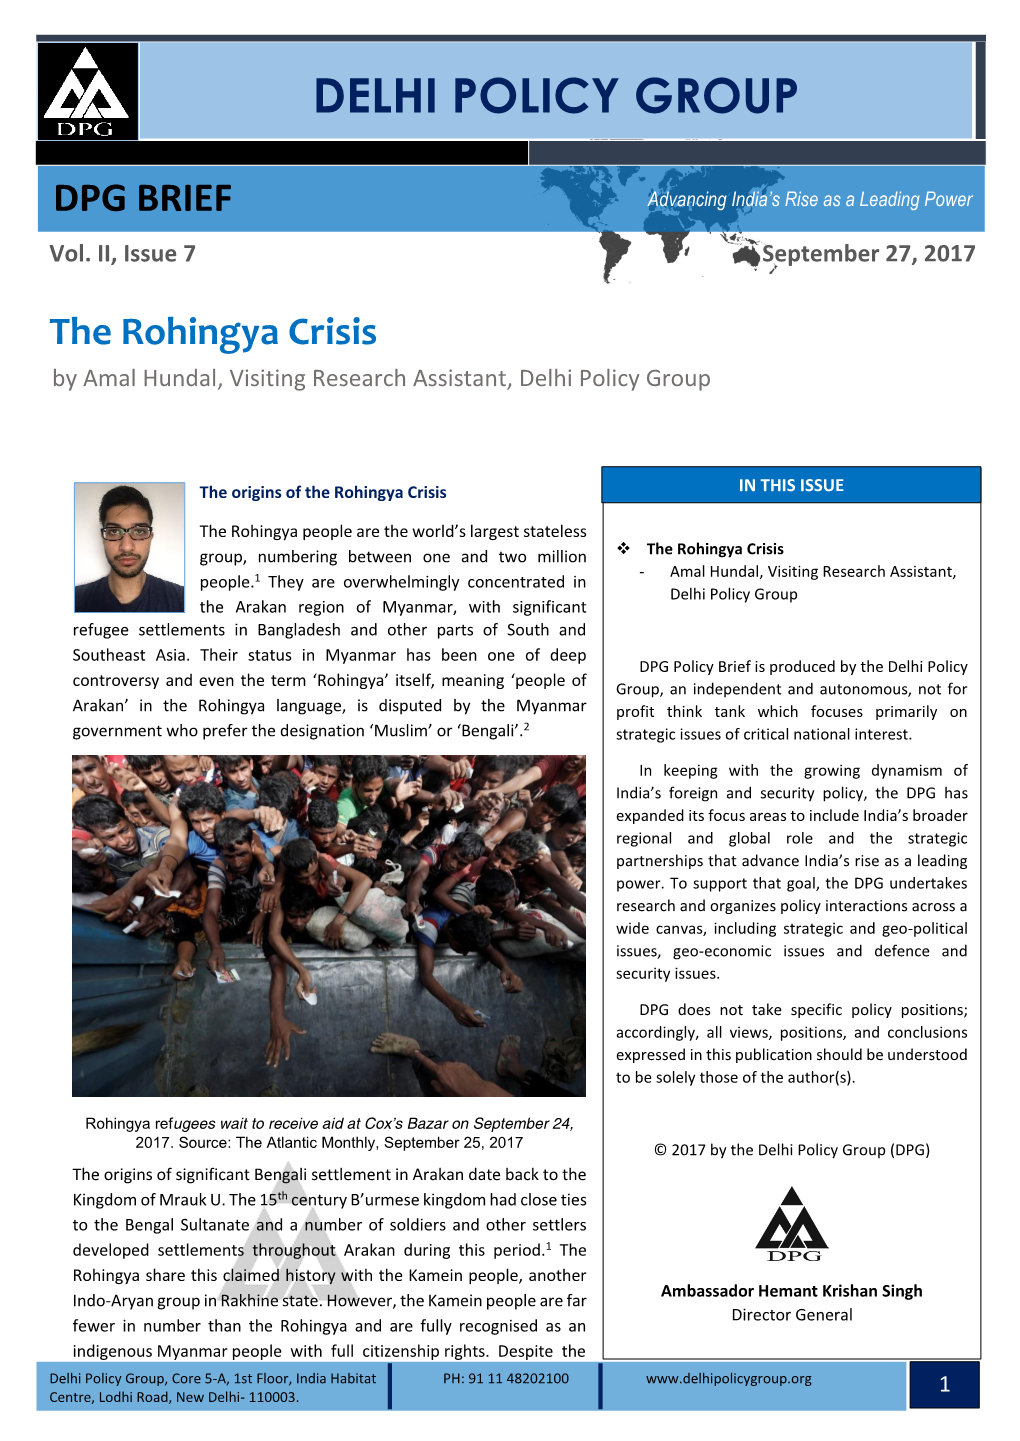 The Rohingya Crisis by Amal Hundal, Visiting Research Assistant, Delhi Policy Group